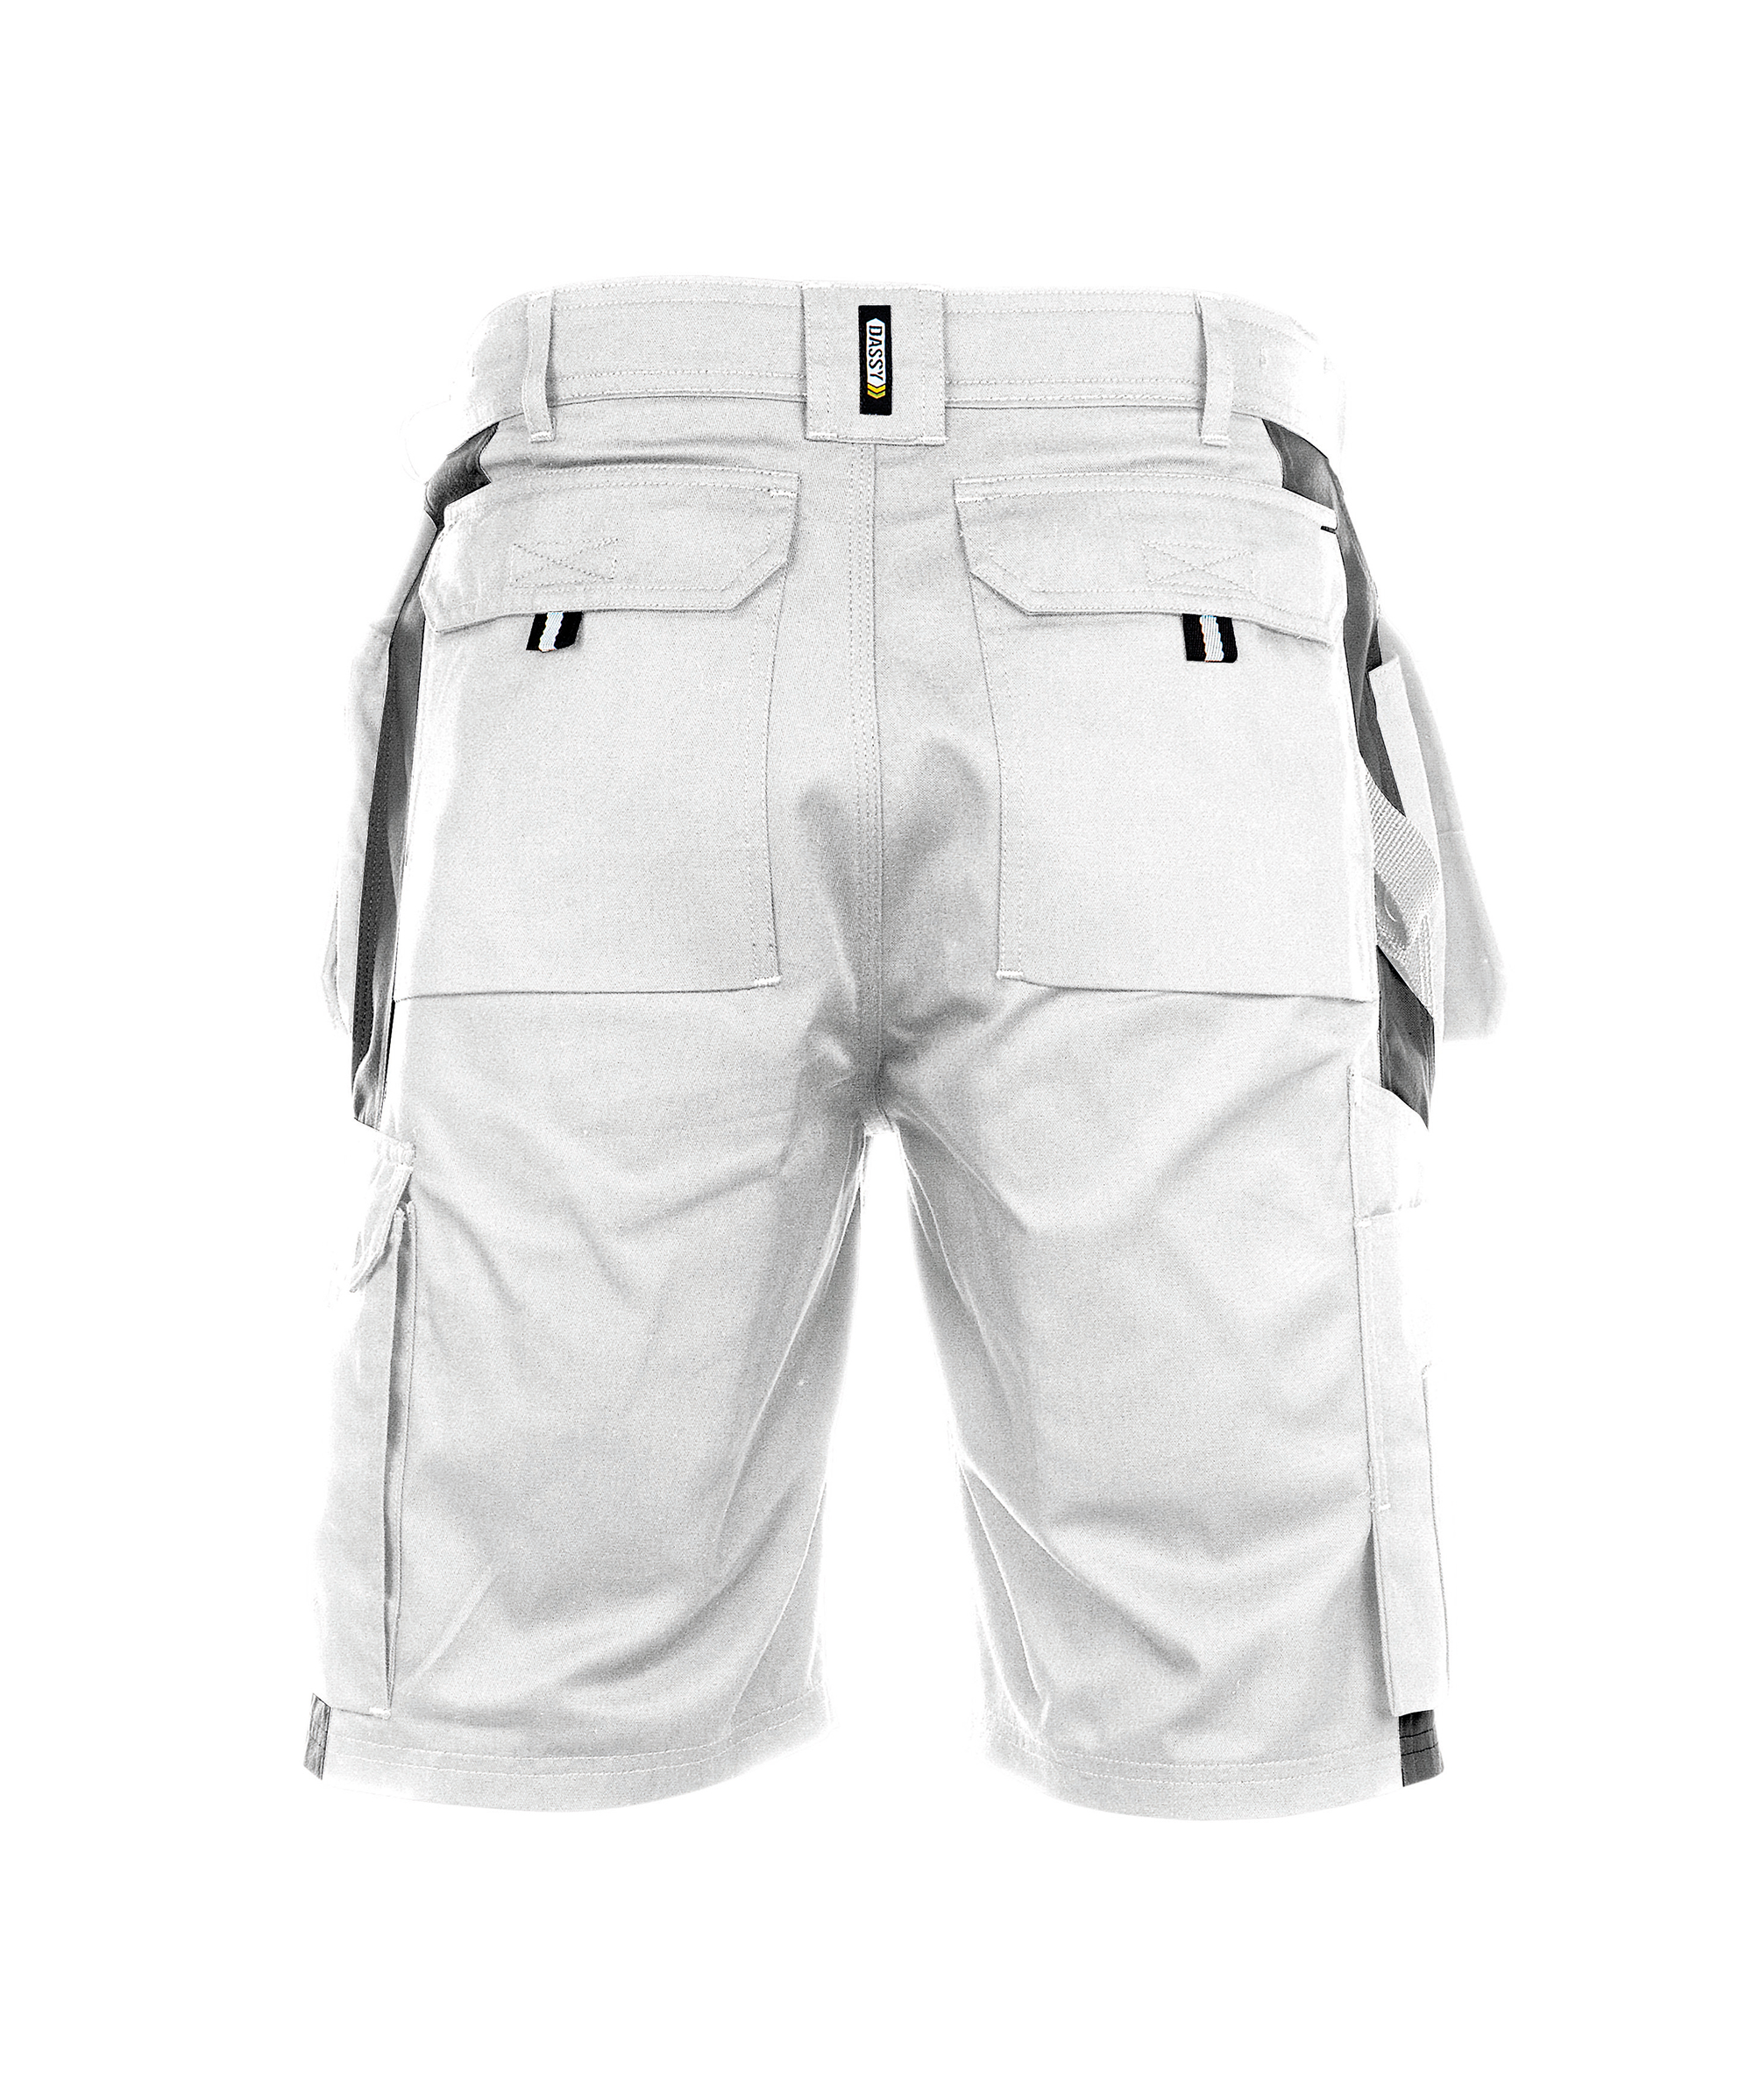 monza_two-tone-work-shorts-with-multi-pockets_white-cement-grey_back.jpg